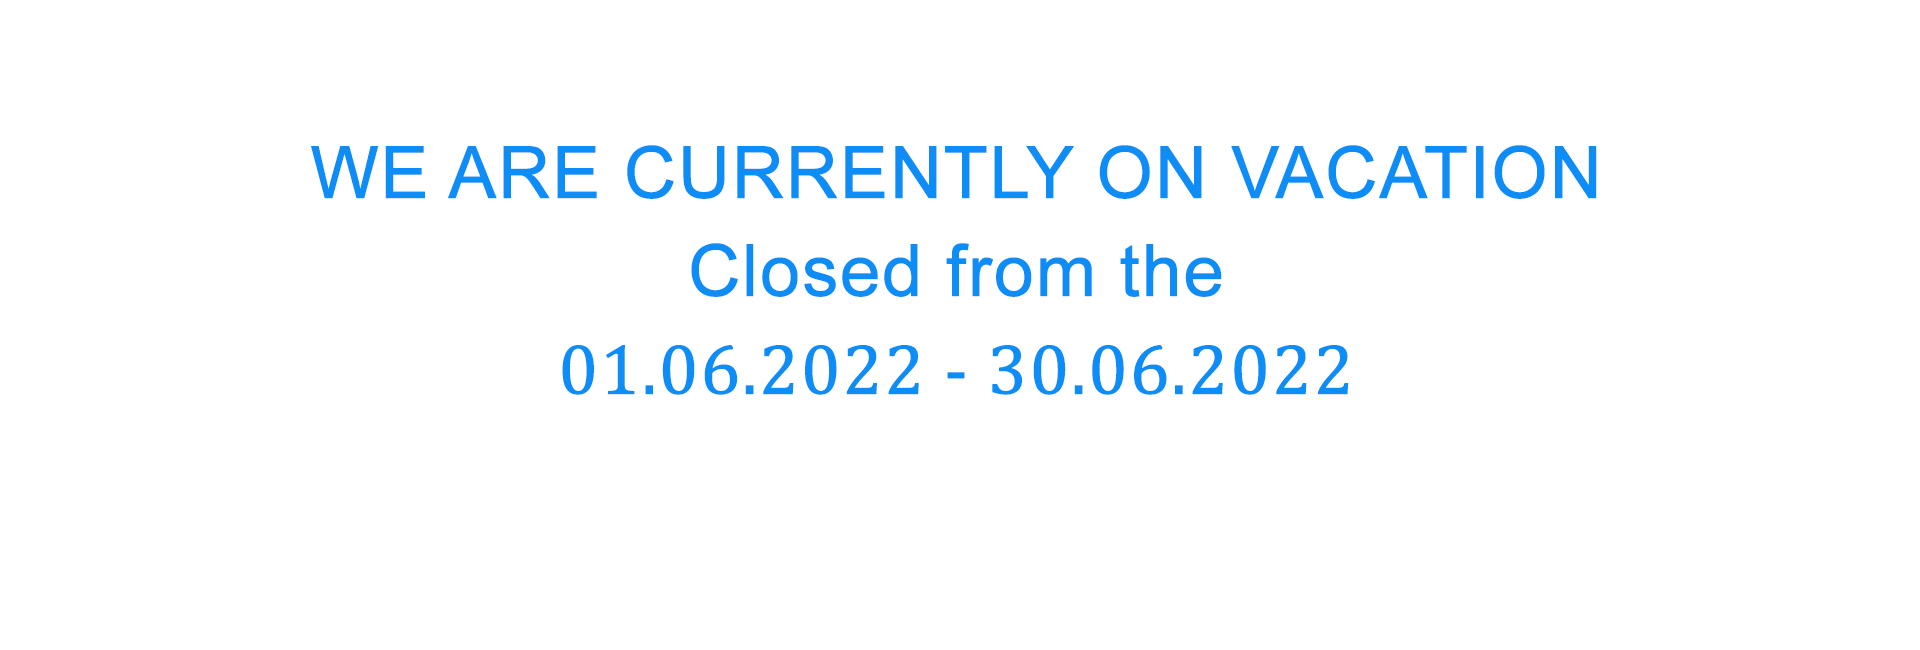 closed-for-vacation